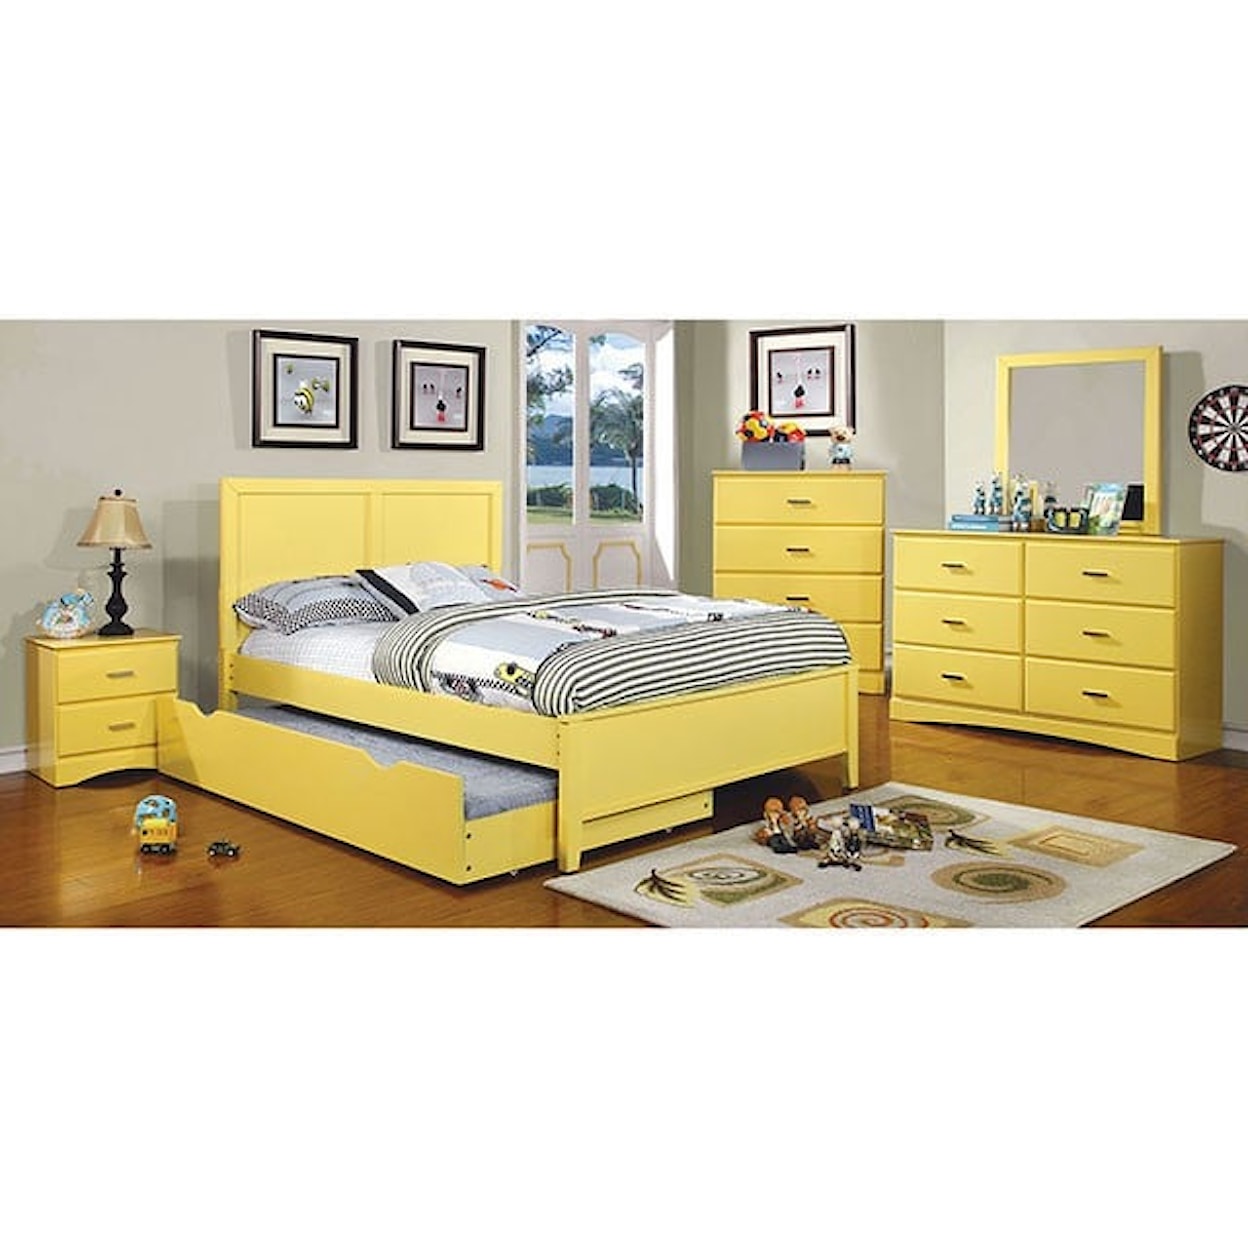 Furniture of America - FOA Prismo Youth Twin Bed with Trundle